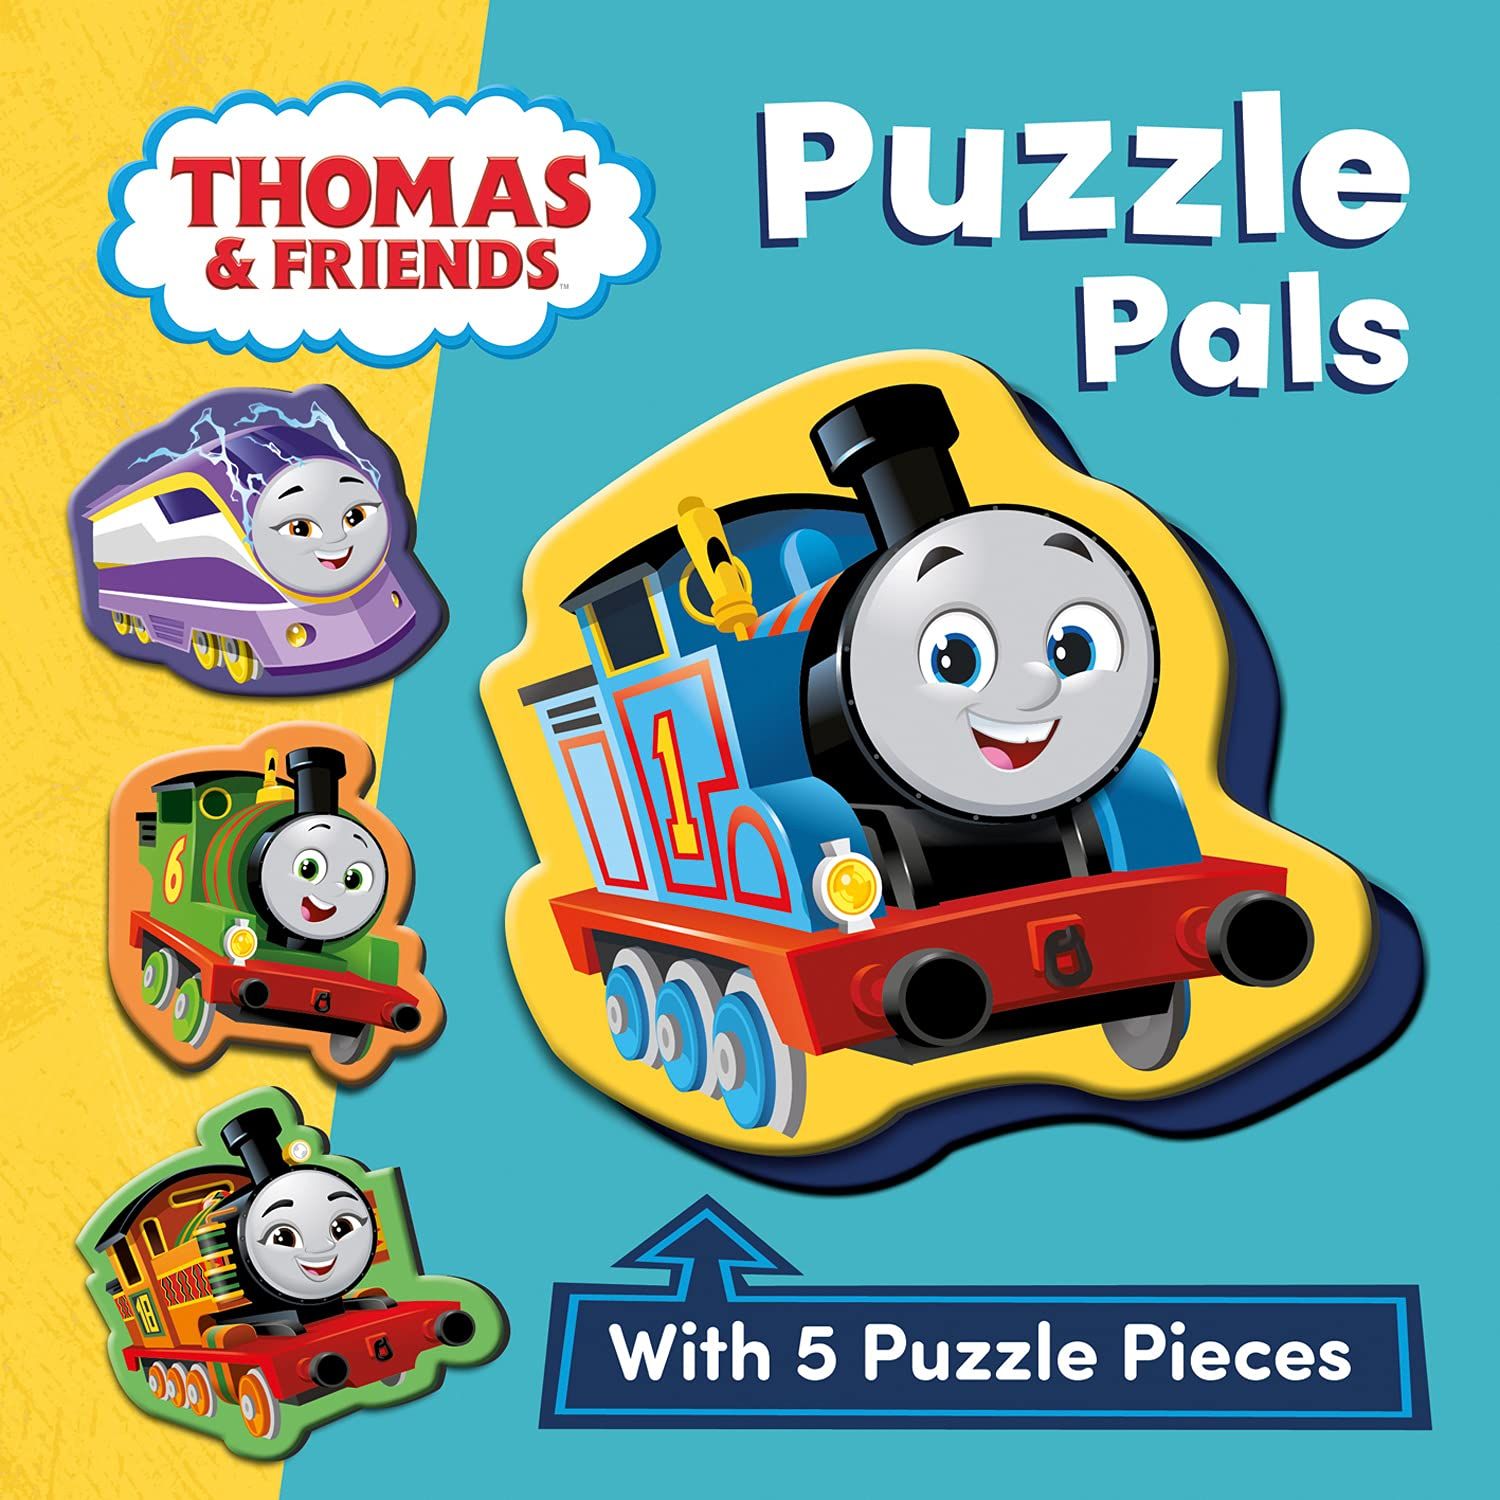 Thomas and Friends: Puzzle Pals